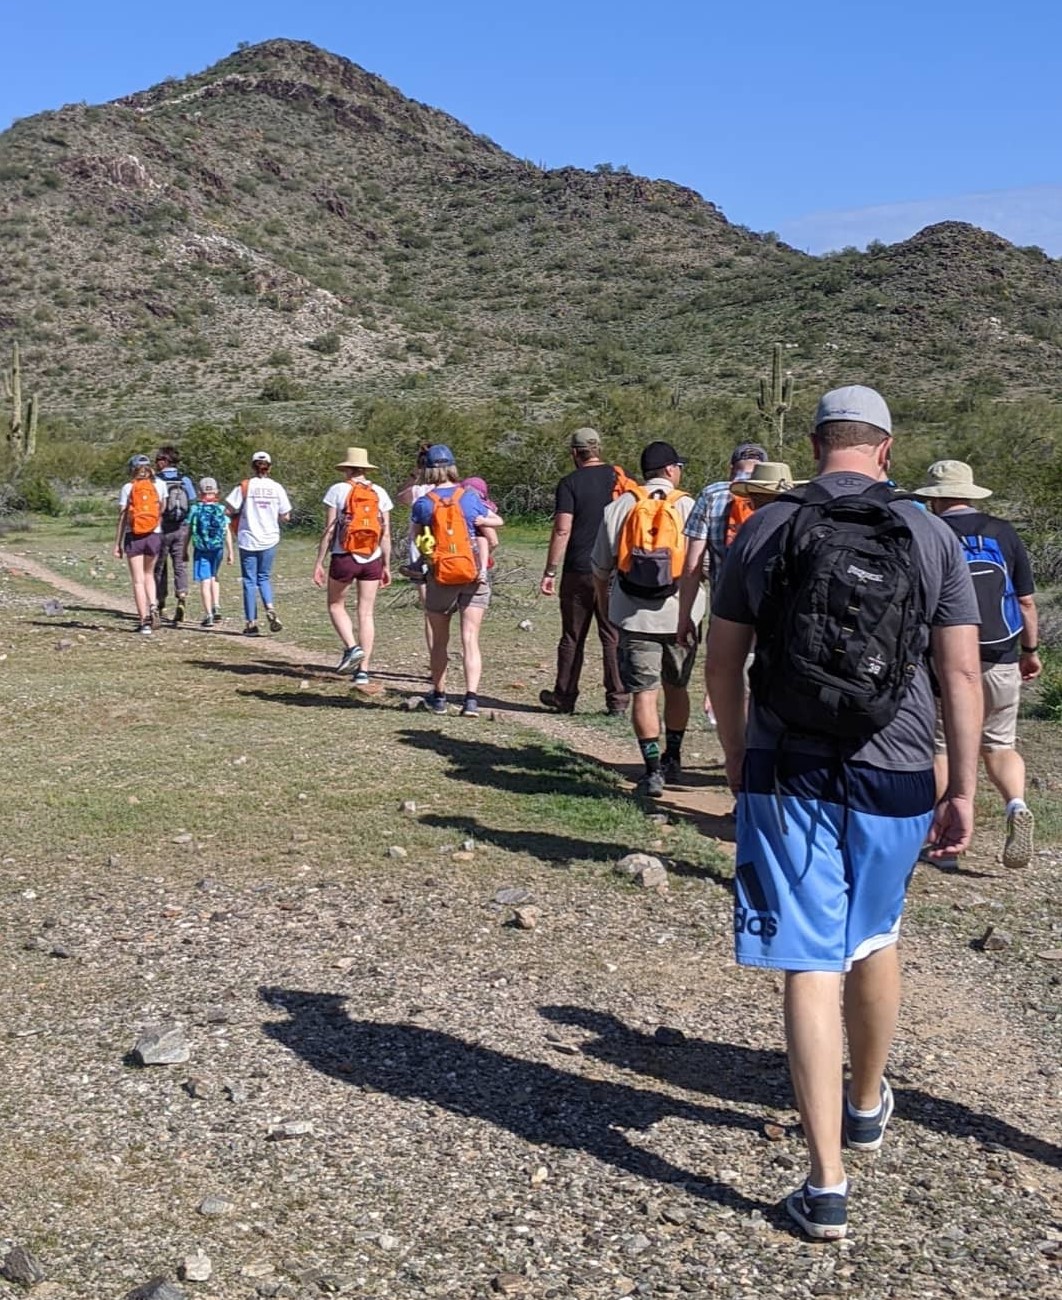 A long line of hikers makes it way along the twisting trails to experience the unforgettable Southwest scenery on another Phoenix group hike with the Wild Bunch.